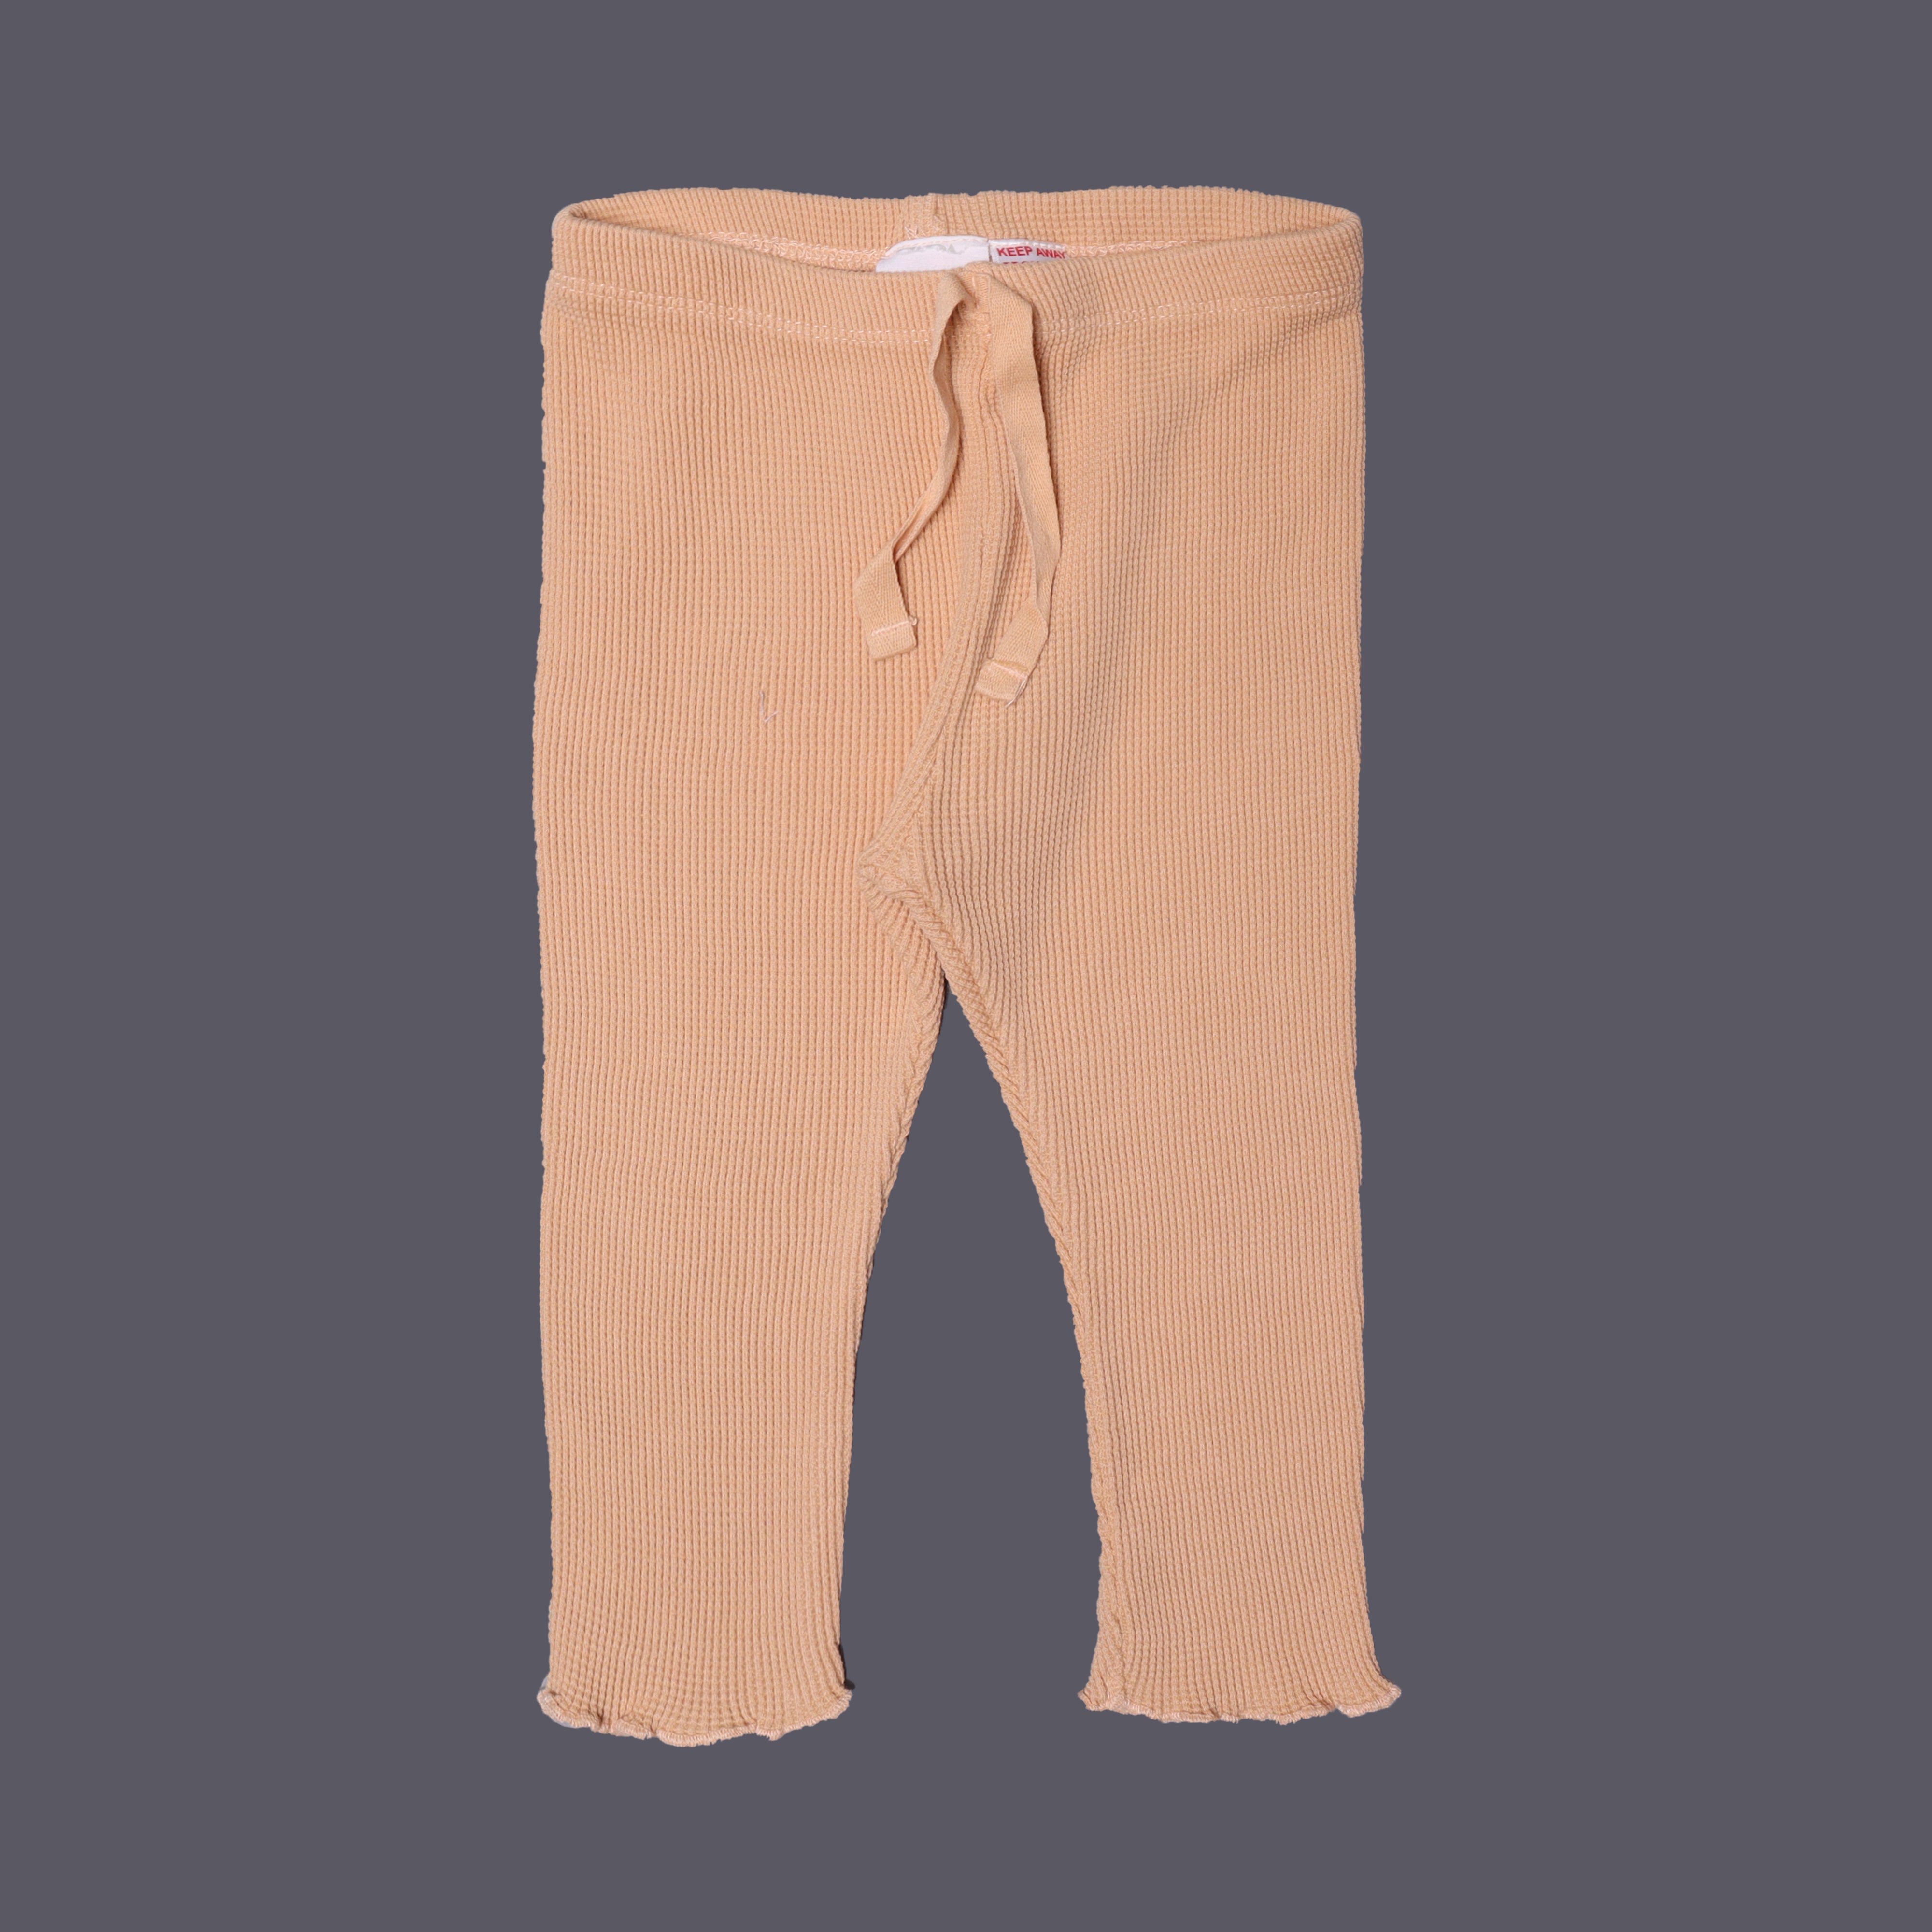 FAWN WITH KNOT BOTTOM FRIL THERMAL FABRIC PLAIN PAJAMA TROUSER